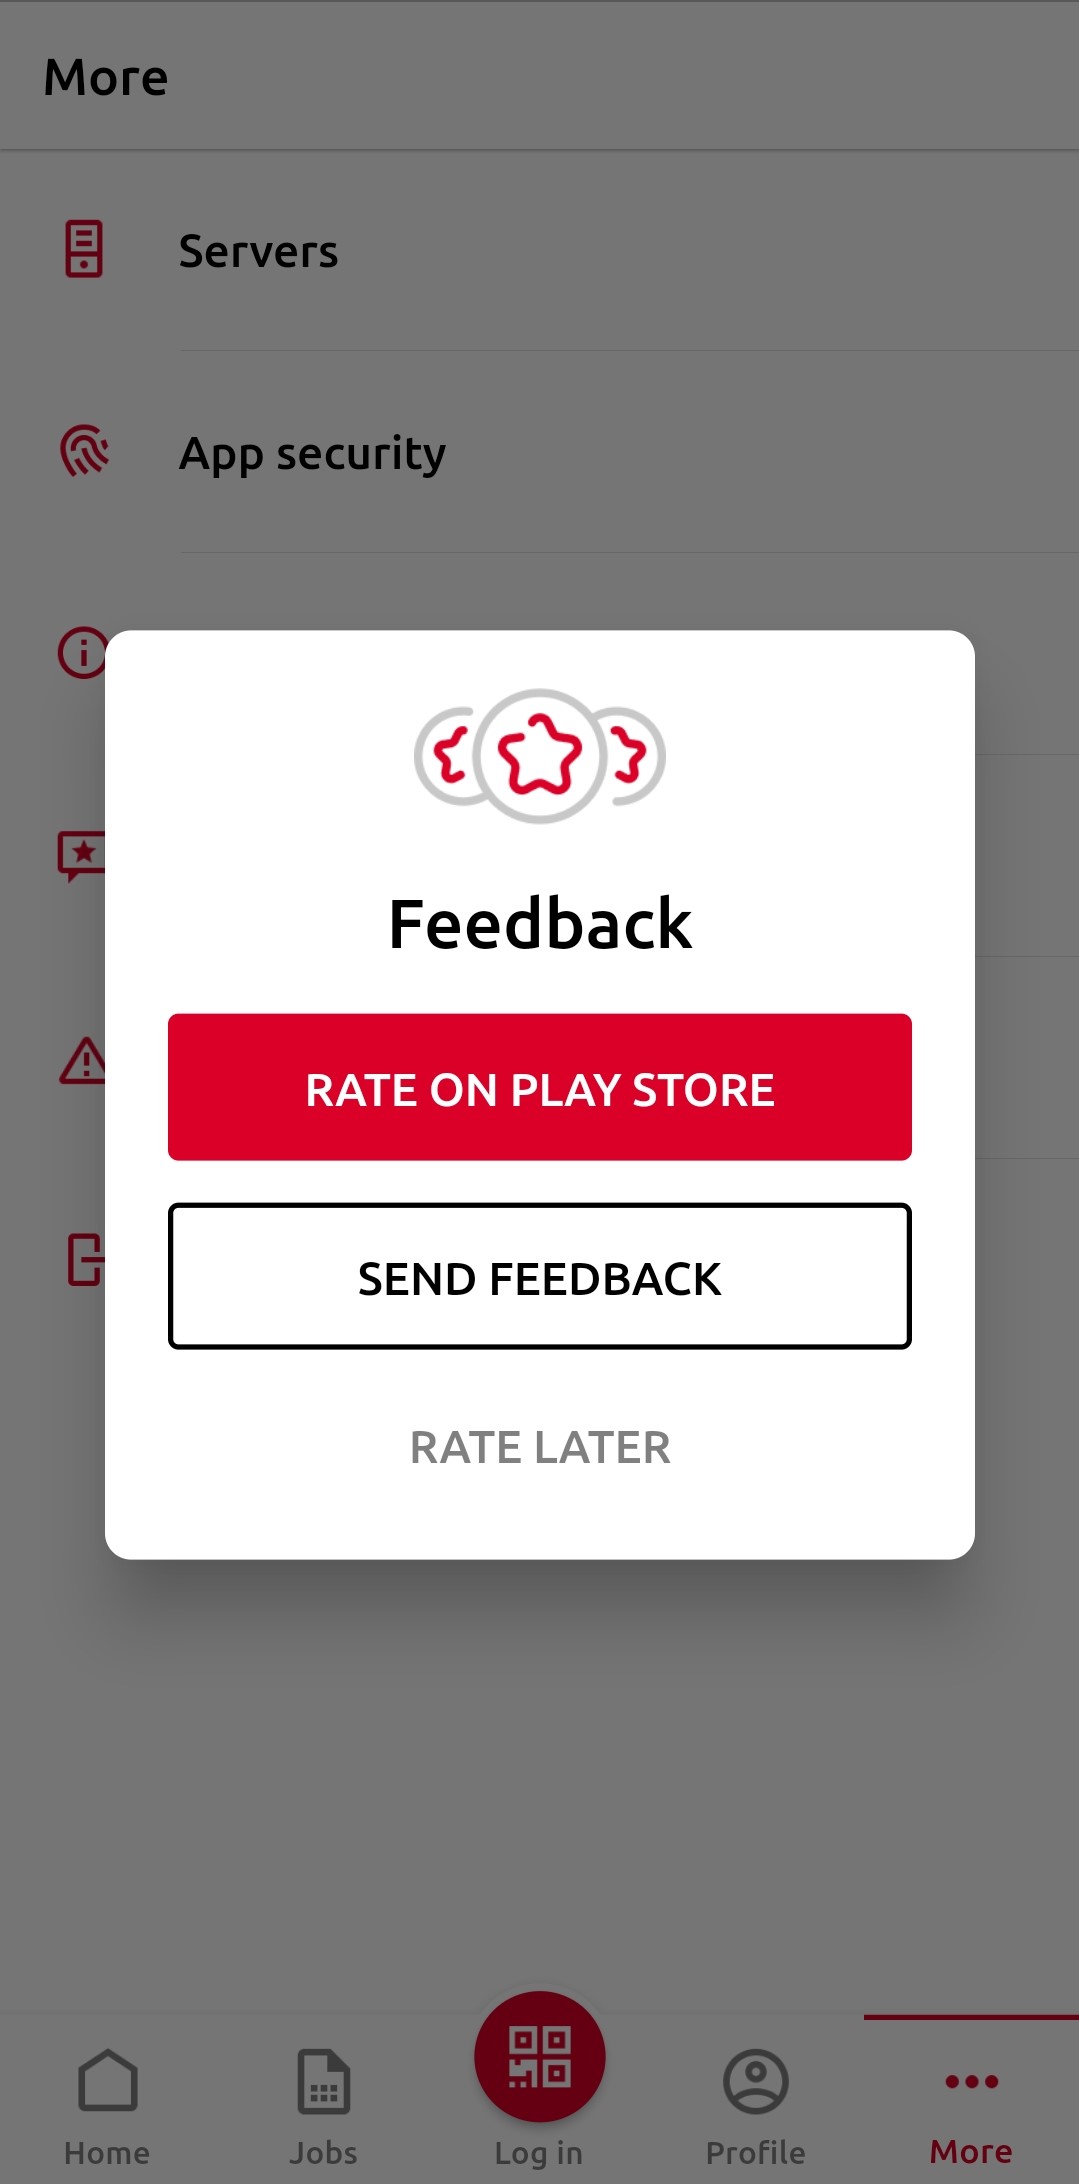 Send feedback and rate the app